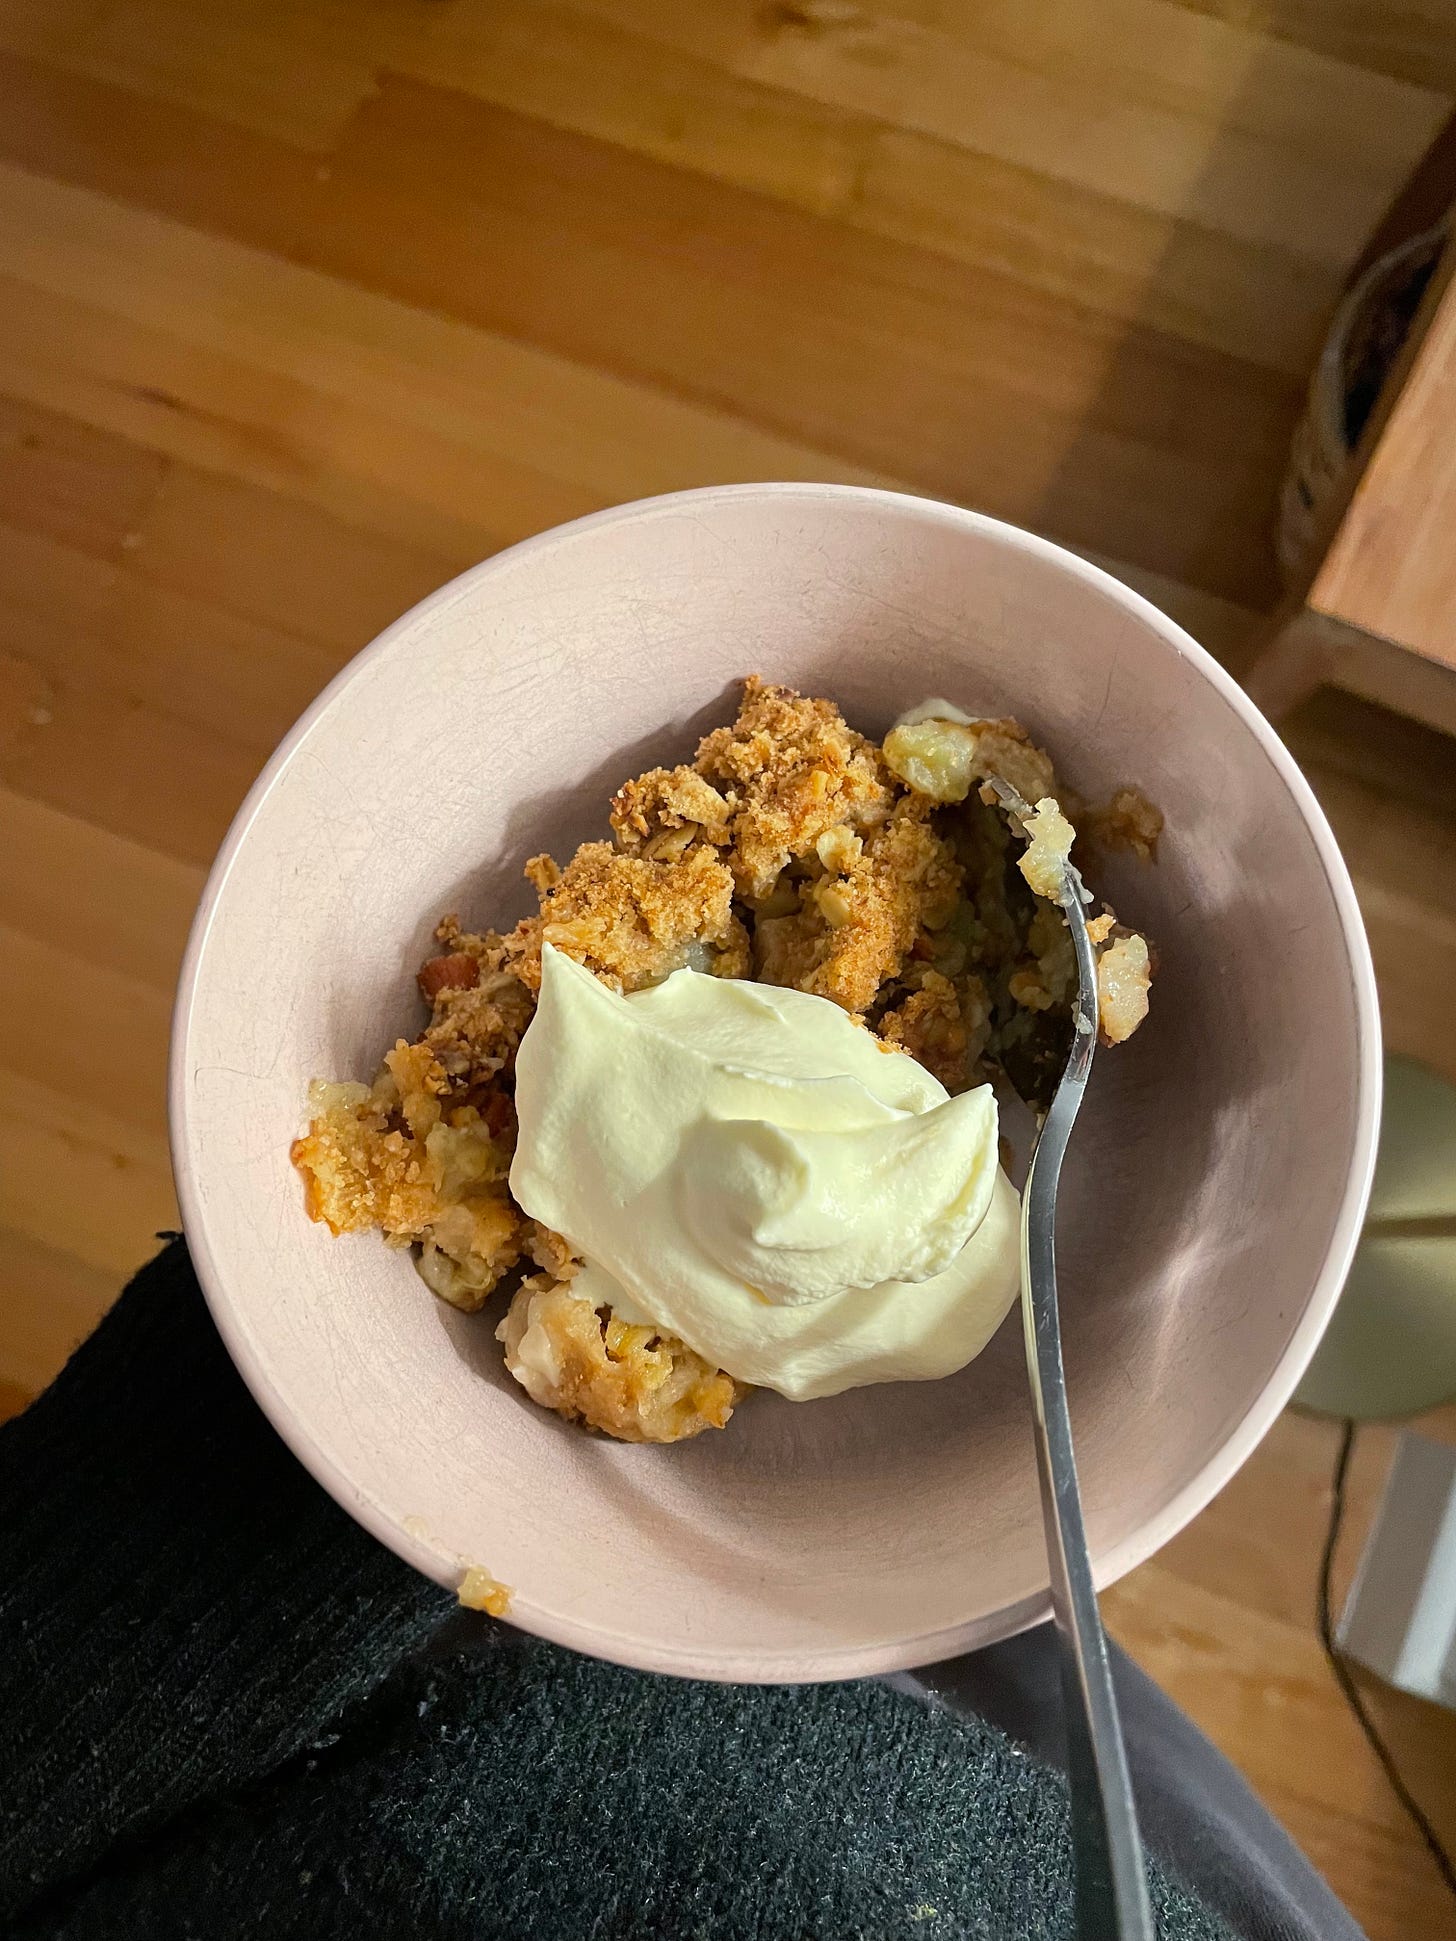 Small bowl of apple crumble, with a golden-brown topping. Served with whipped cream on top. The person holding the bowl is wearing a dark green woollen jumper and track pants for a night in at home.